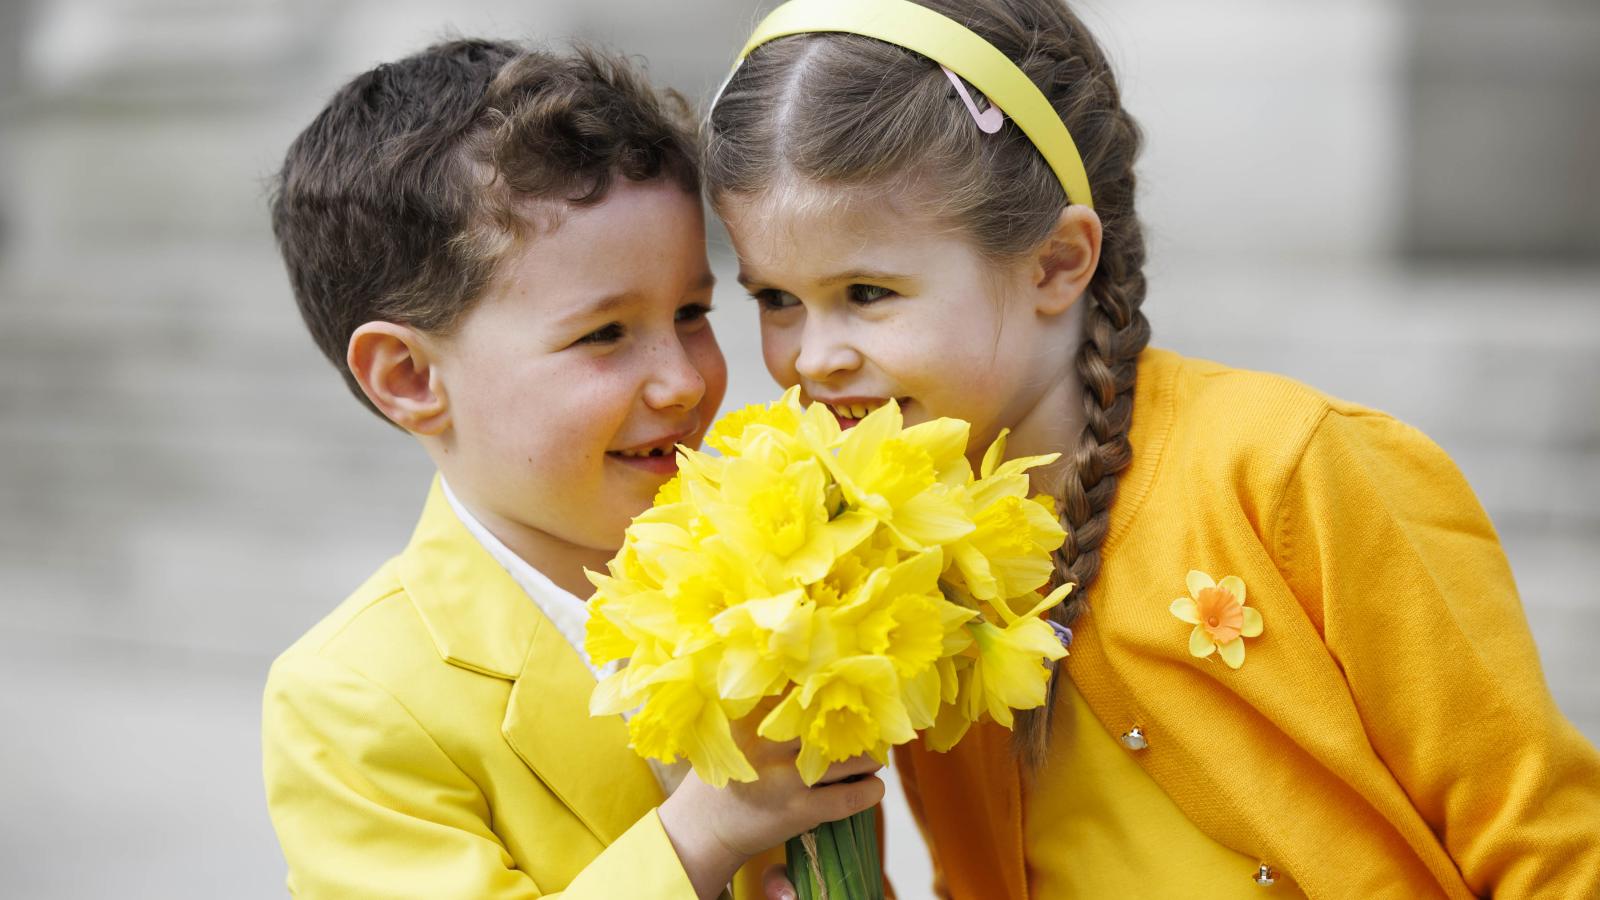 Kids dressed in yellow holding daffodils